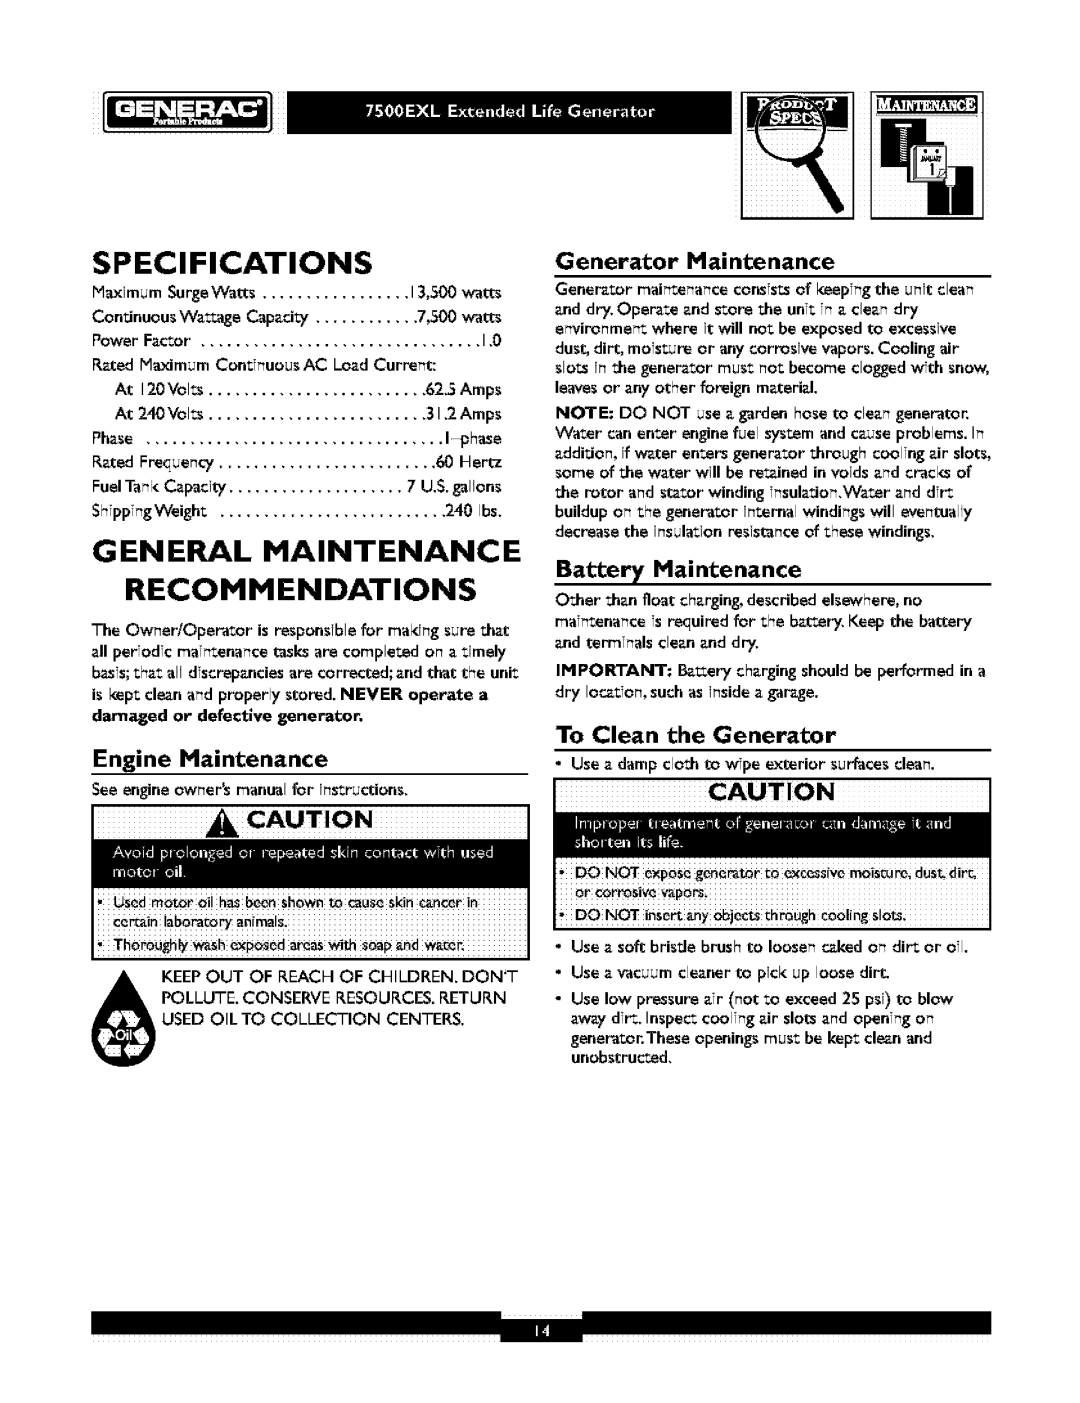 Generac 1019-3 owner manual Specifications, General Haintenance Recommendations, Engine Maintenance, Battery Maintenance 